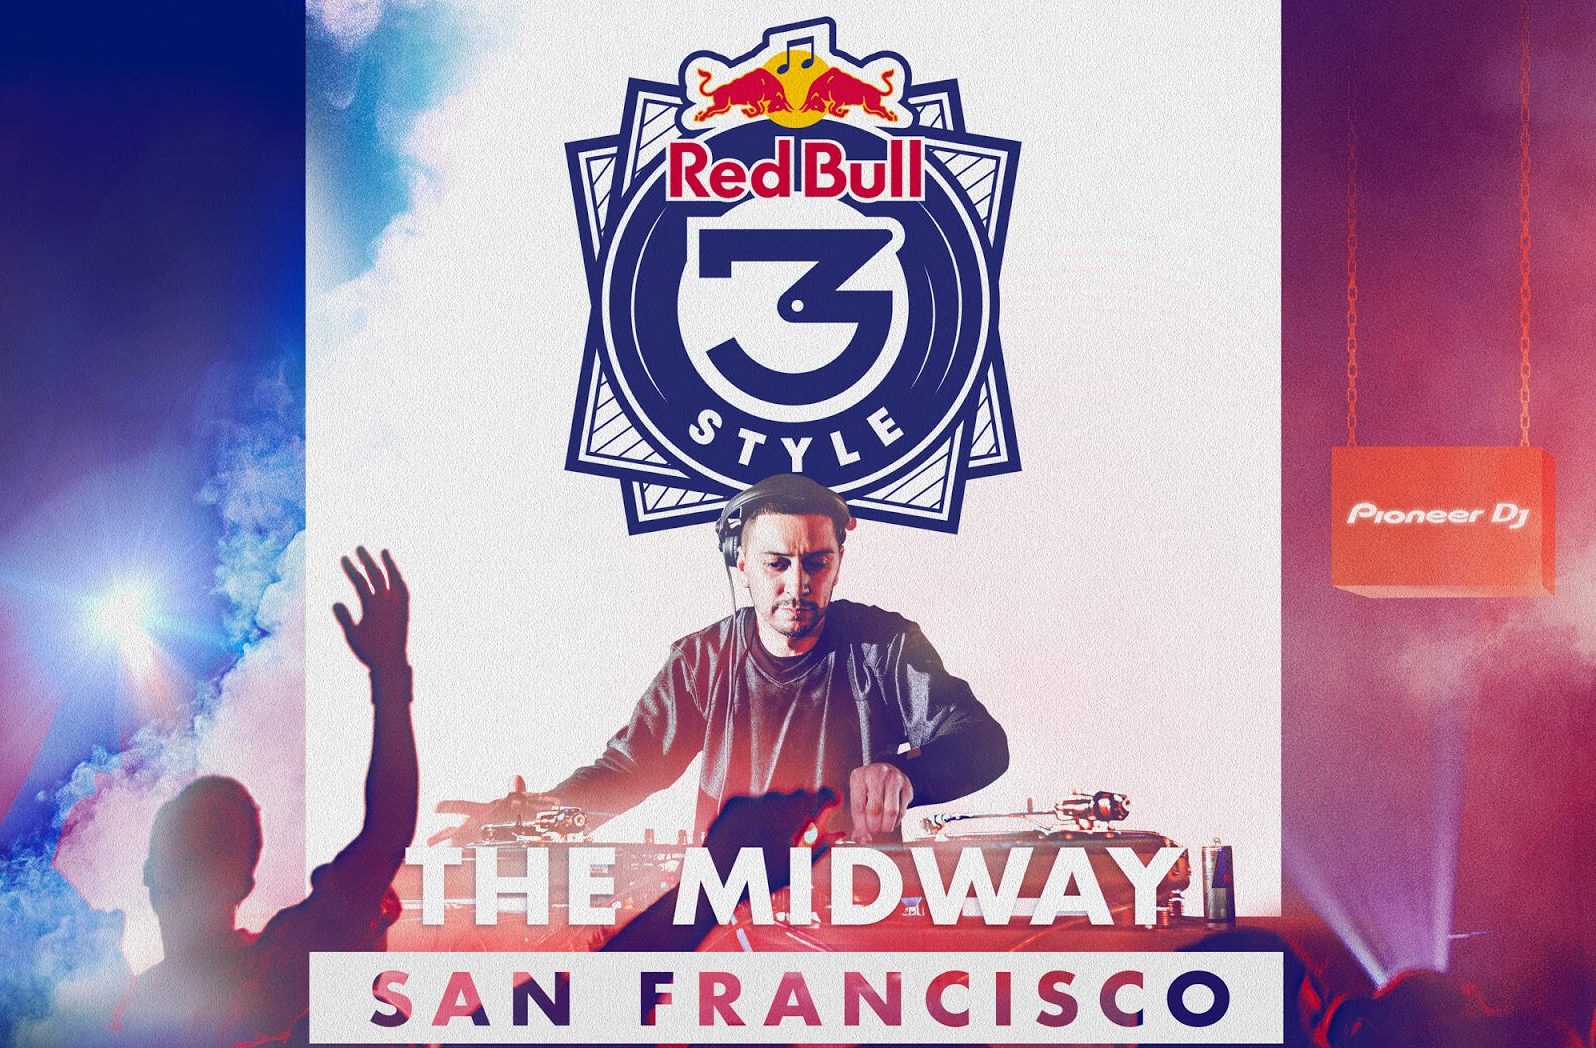 Red Bull 3Style National Finals